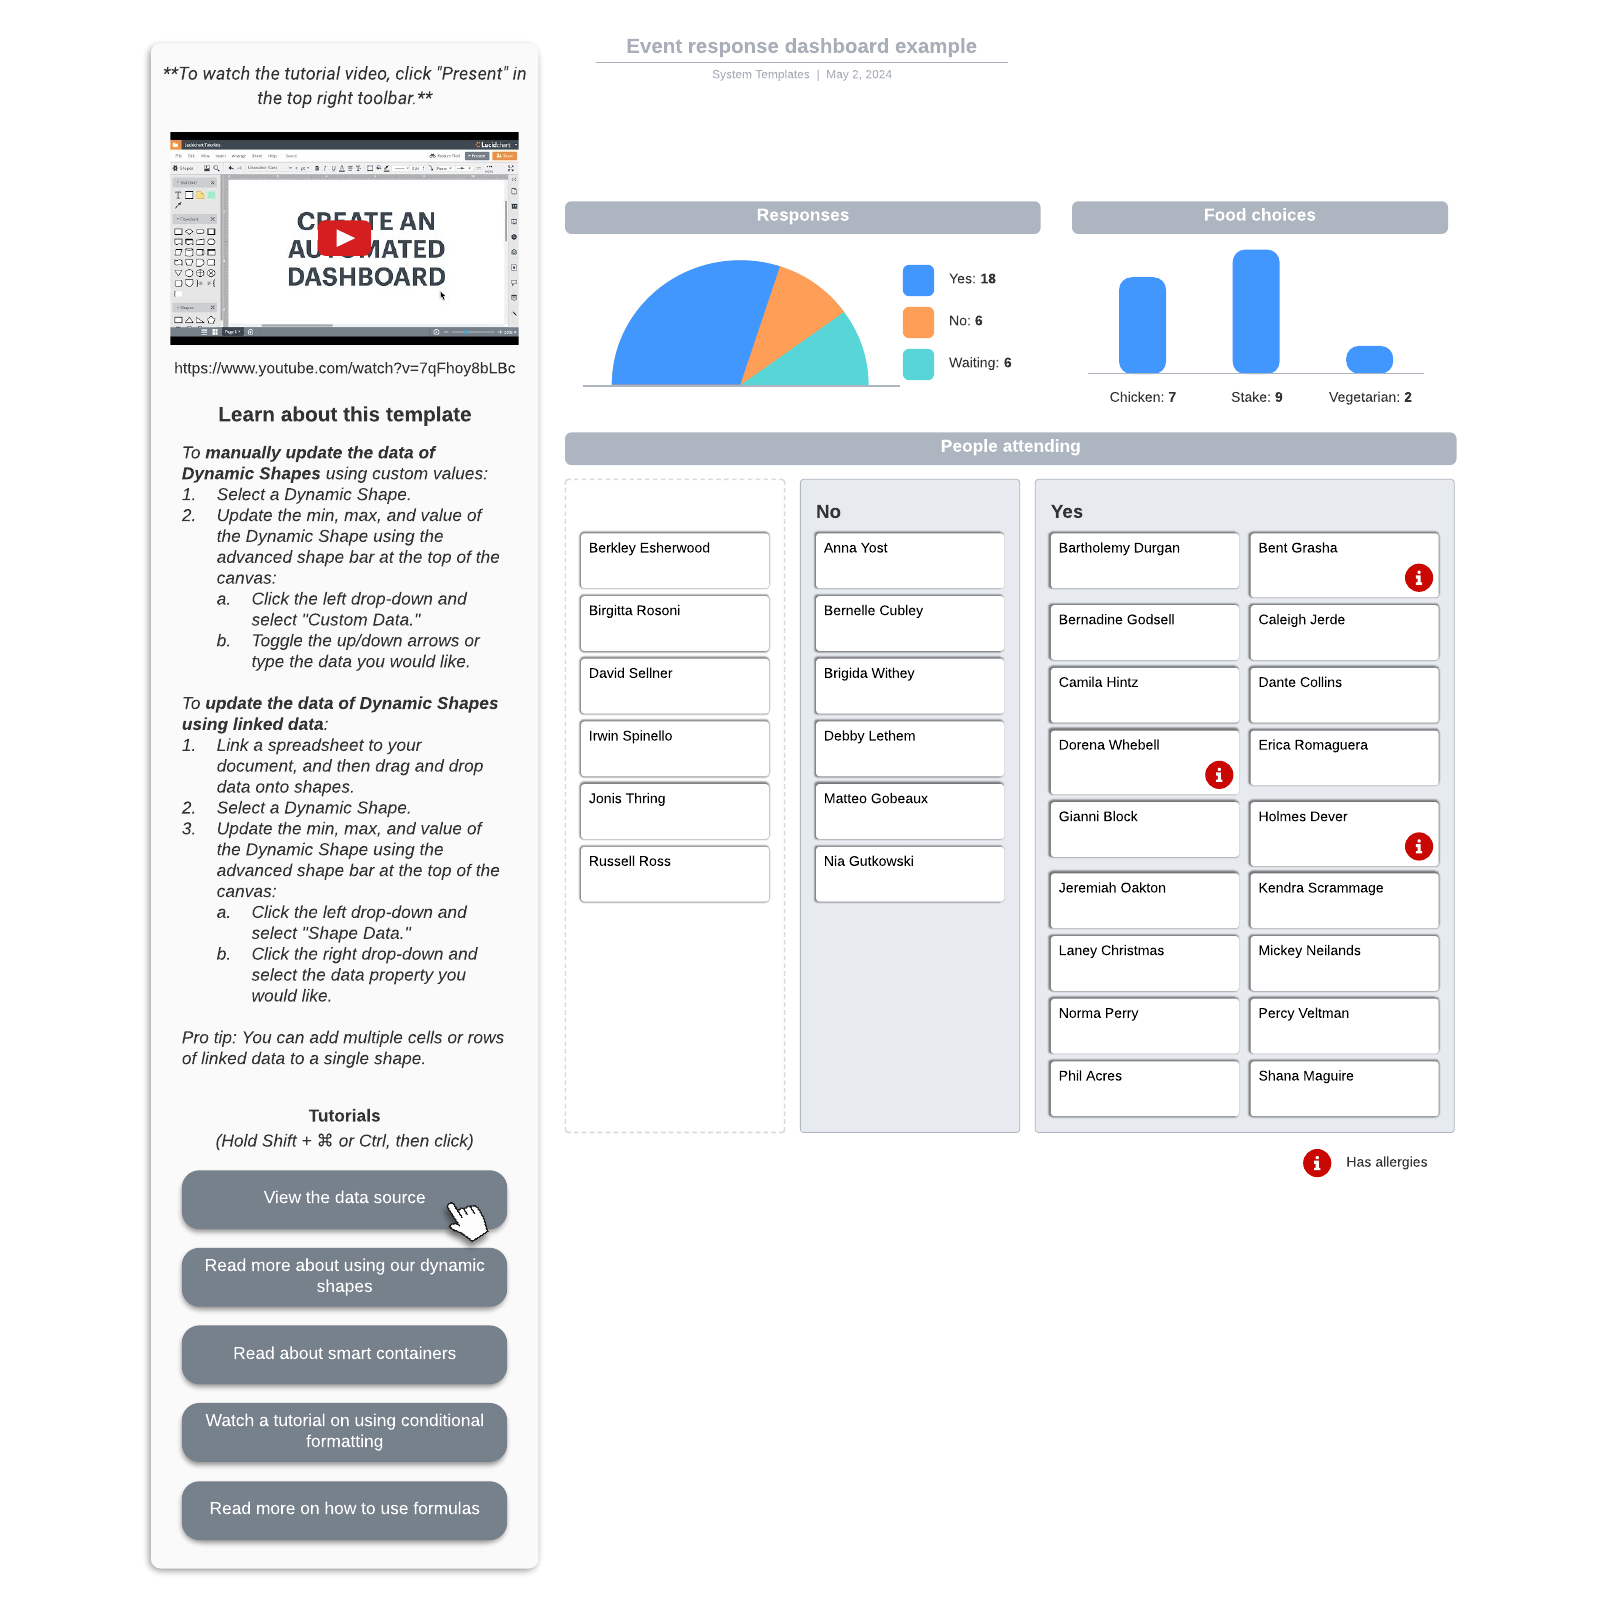 Event response dashboard example example